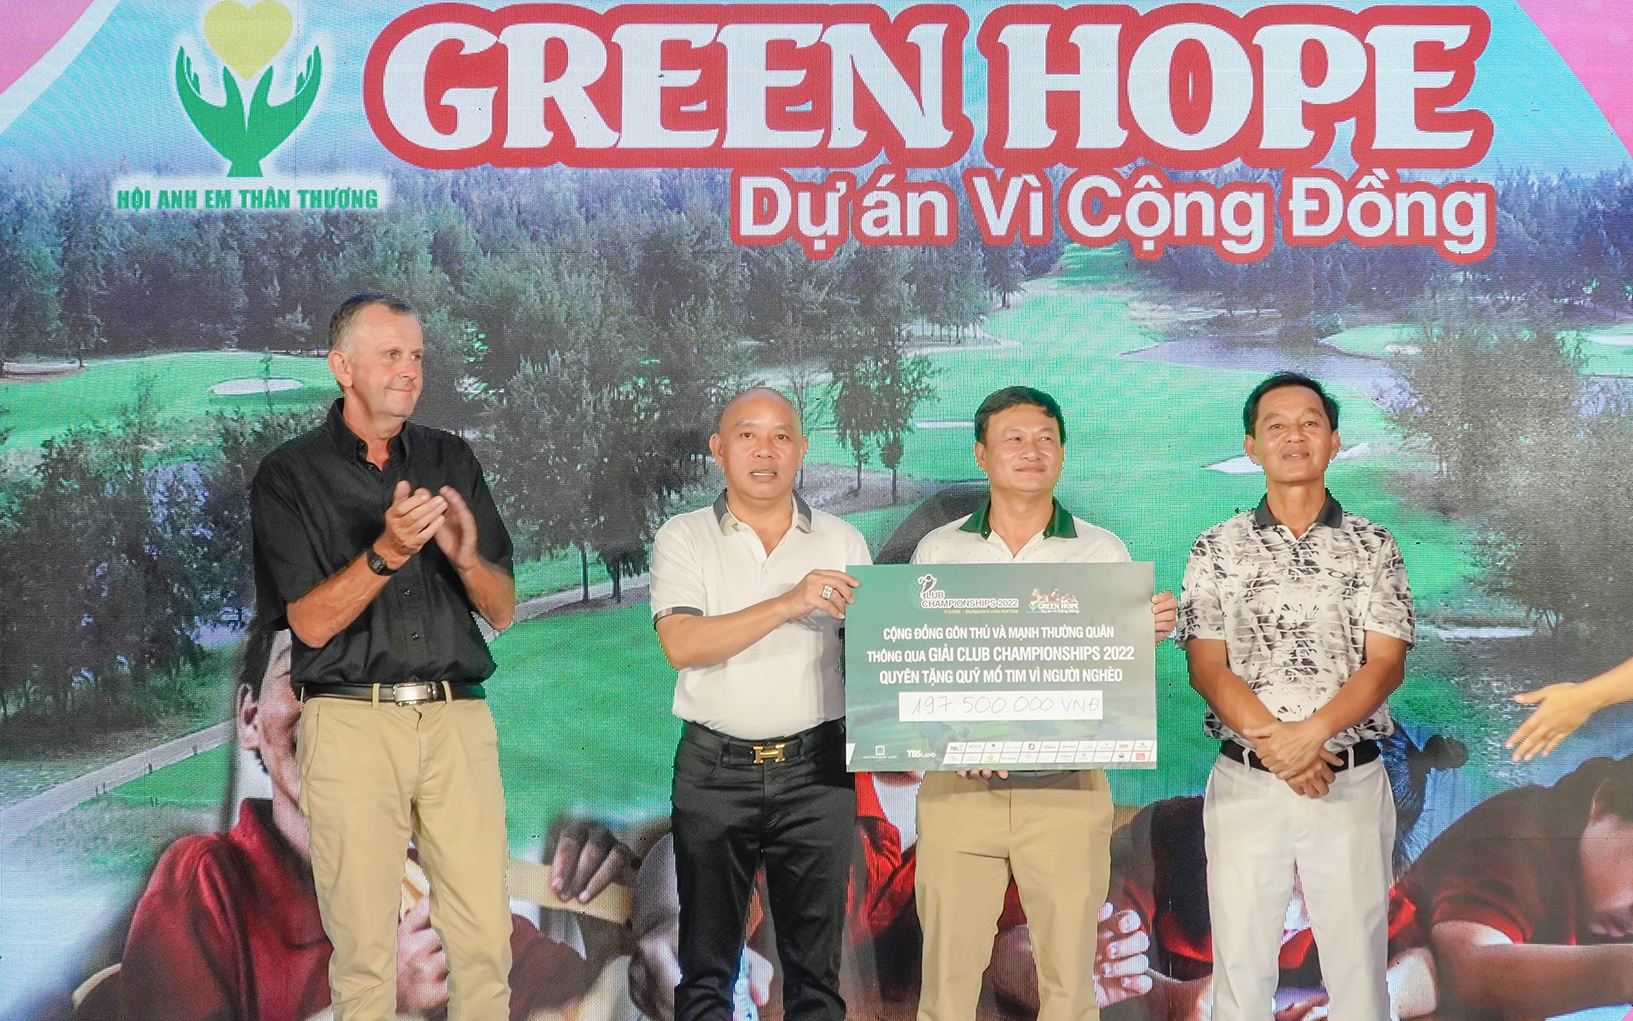 Almost 200 million VND for Heart Surgery Fund in the 12th Club Championship